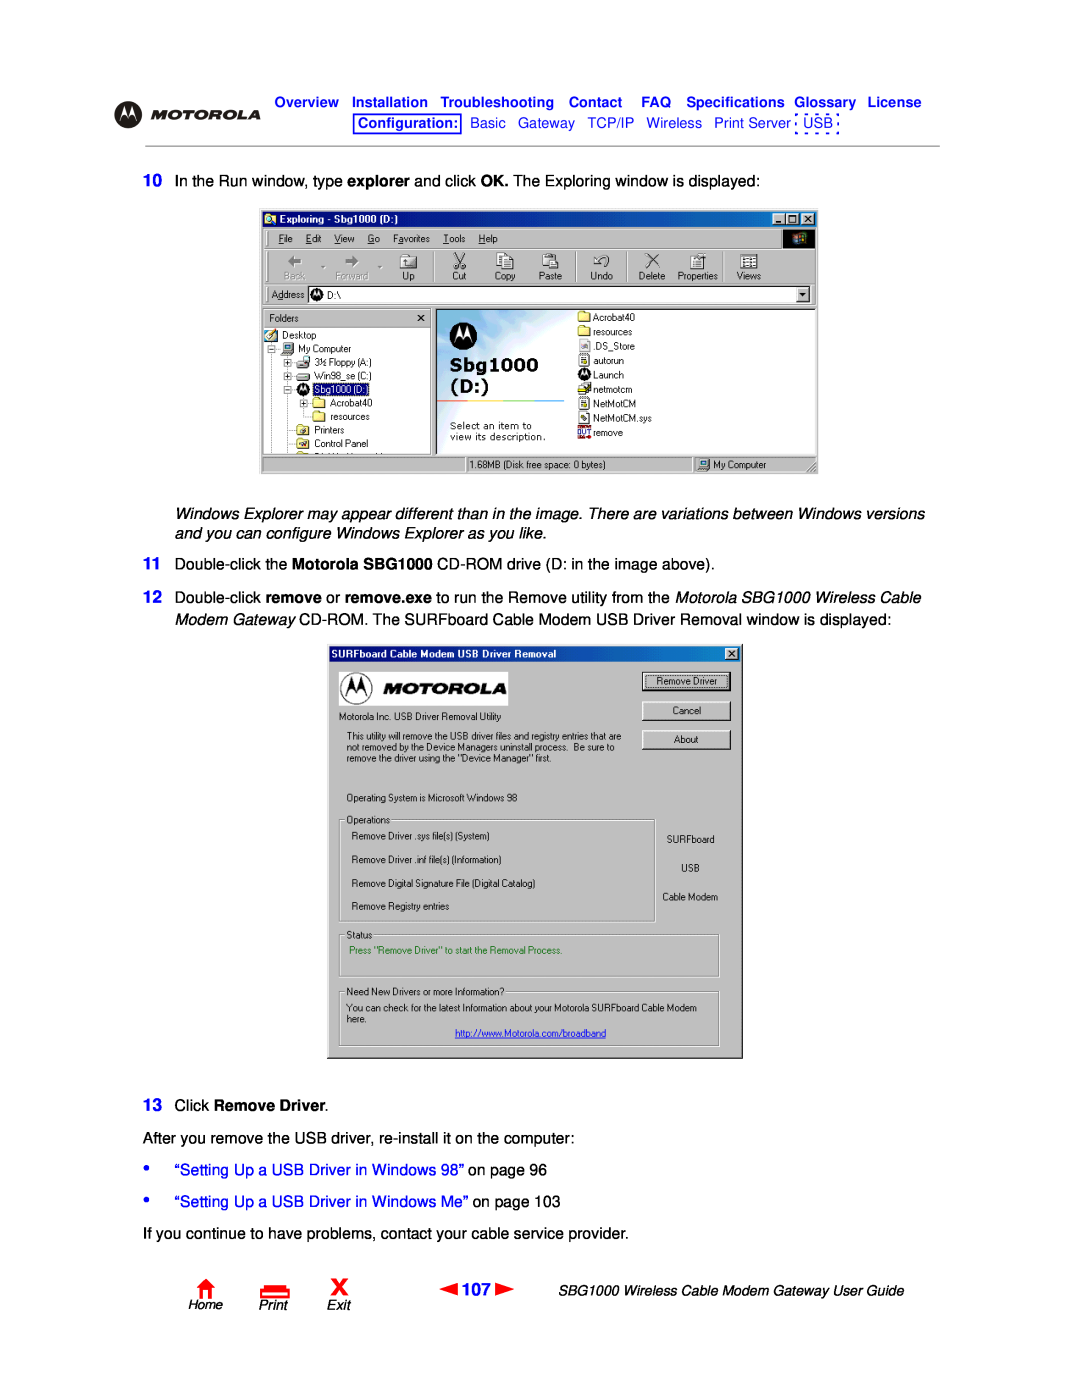 Motorola SBG1000 manual Click Remove Driver, “Setting Up a USB Driver in Windows 98” on page, Home Print Exit 